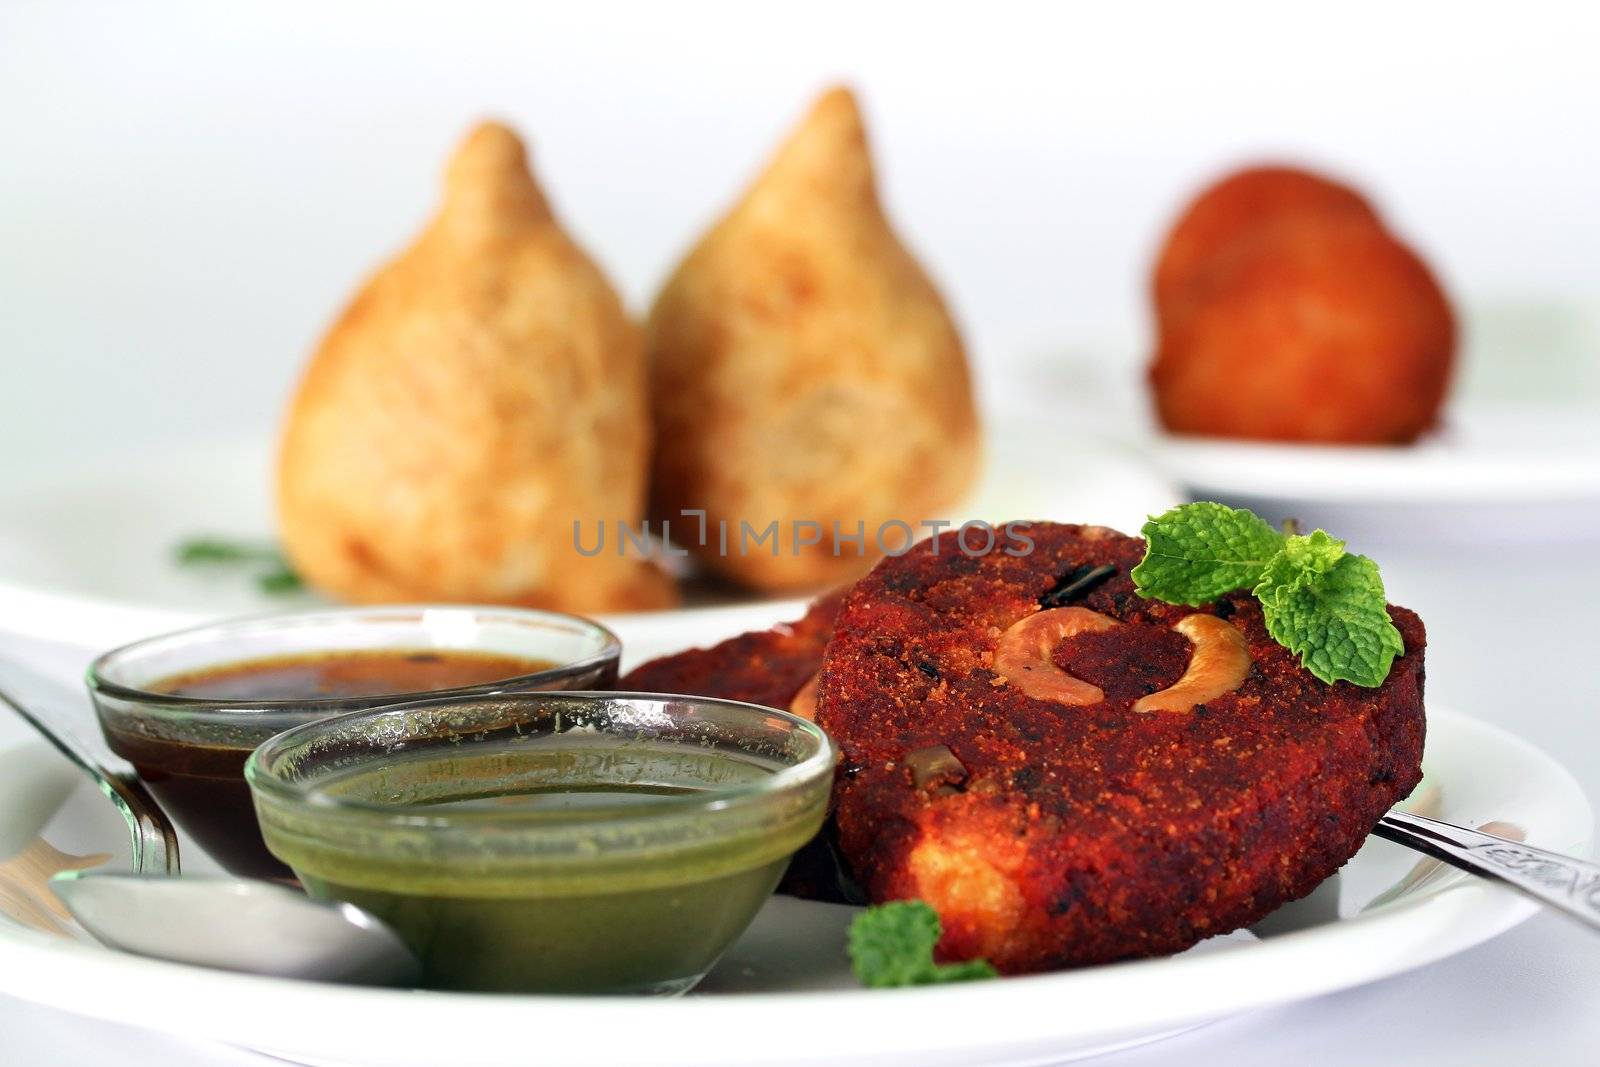 Indian deep fried snack cutlet made of potatoes, masala and cashew with chutneys and another popular snack samosa in the background